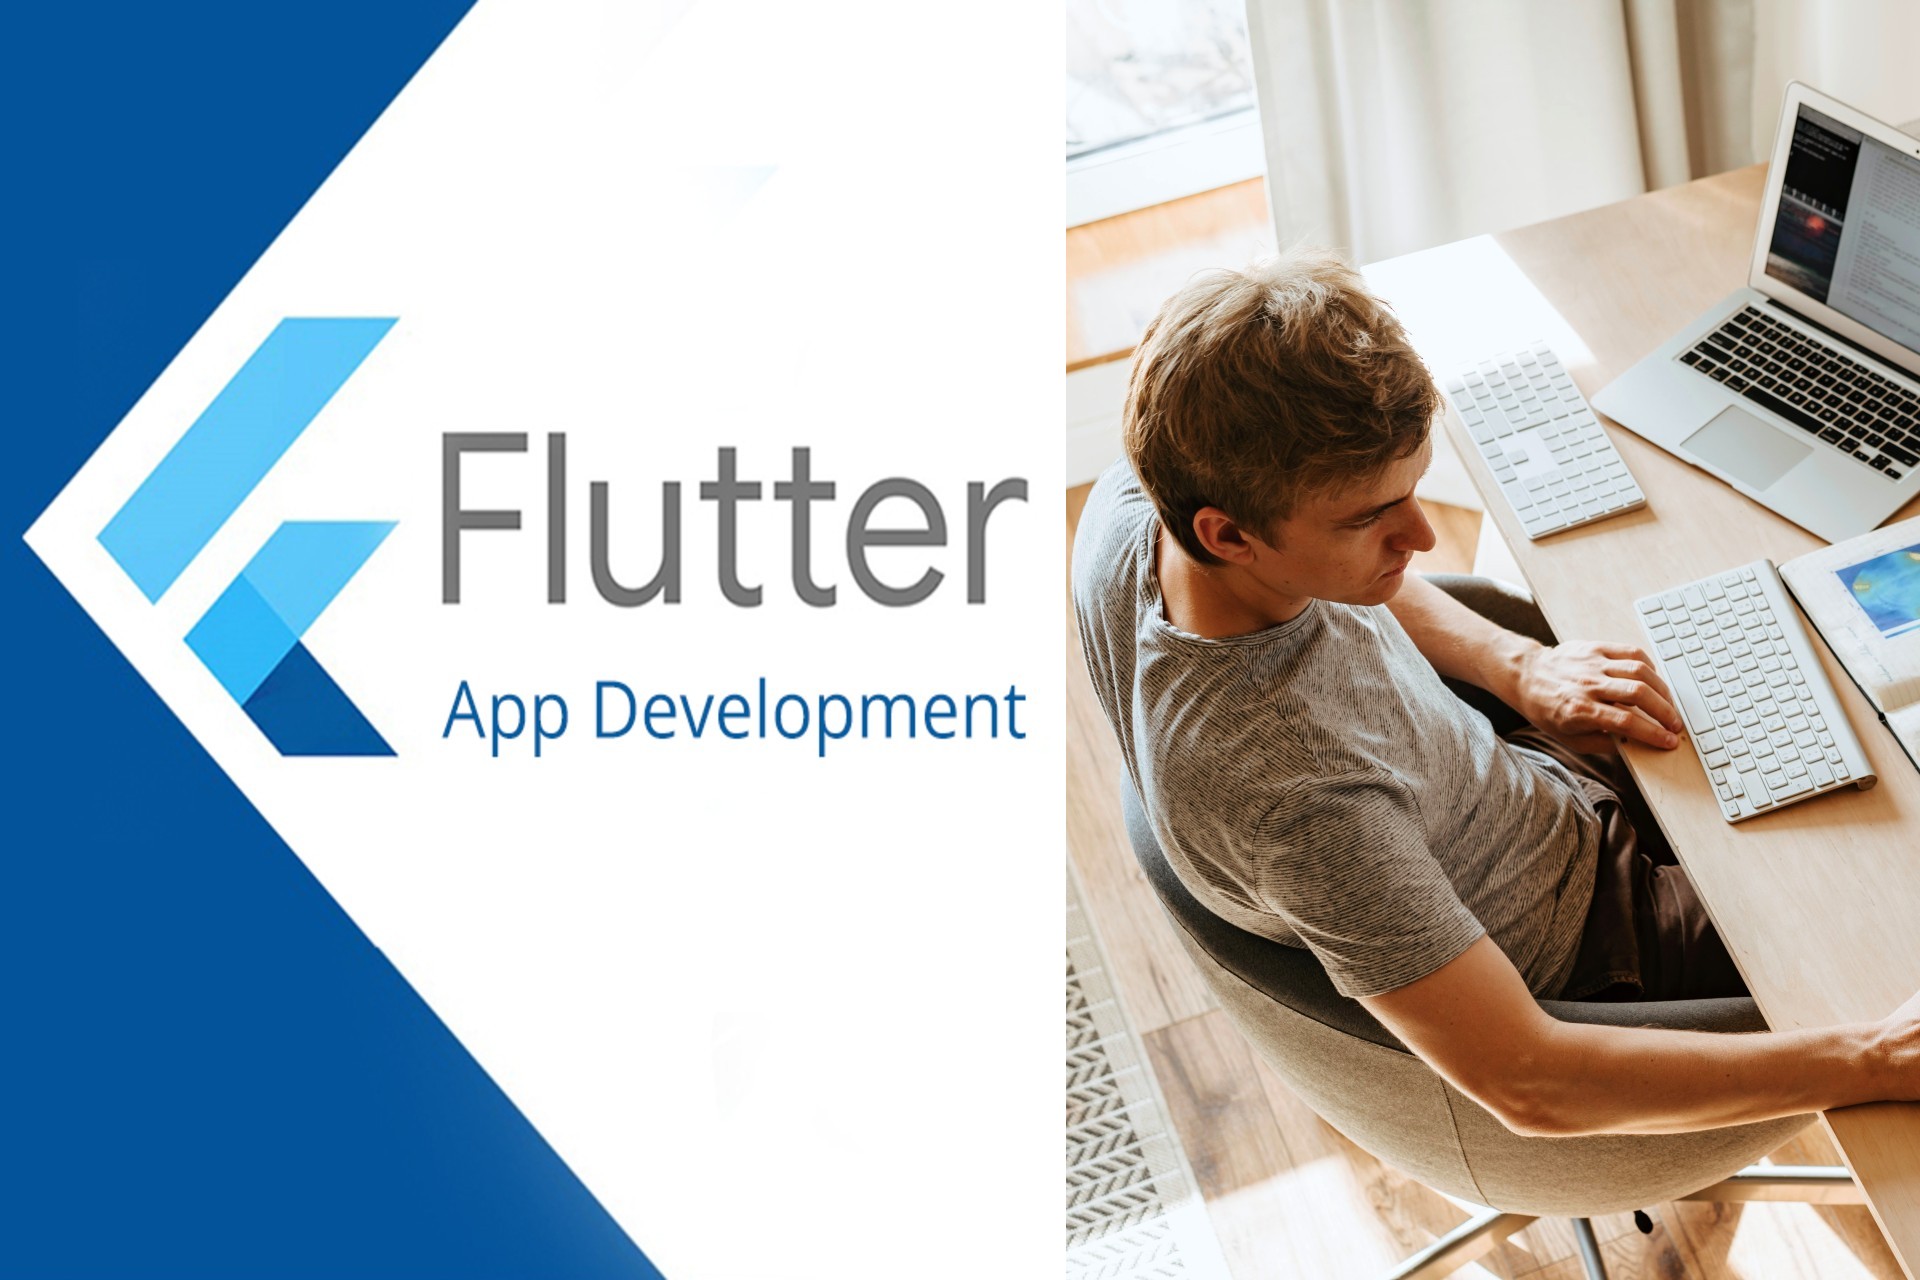 Flutter, released by Google in 2018, was the first cross-platform app development framework and it remains the best choice for developing startup mobile apps.